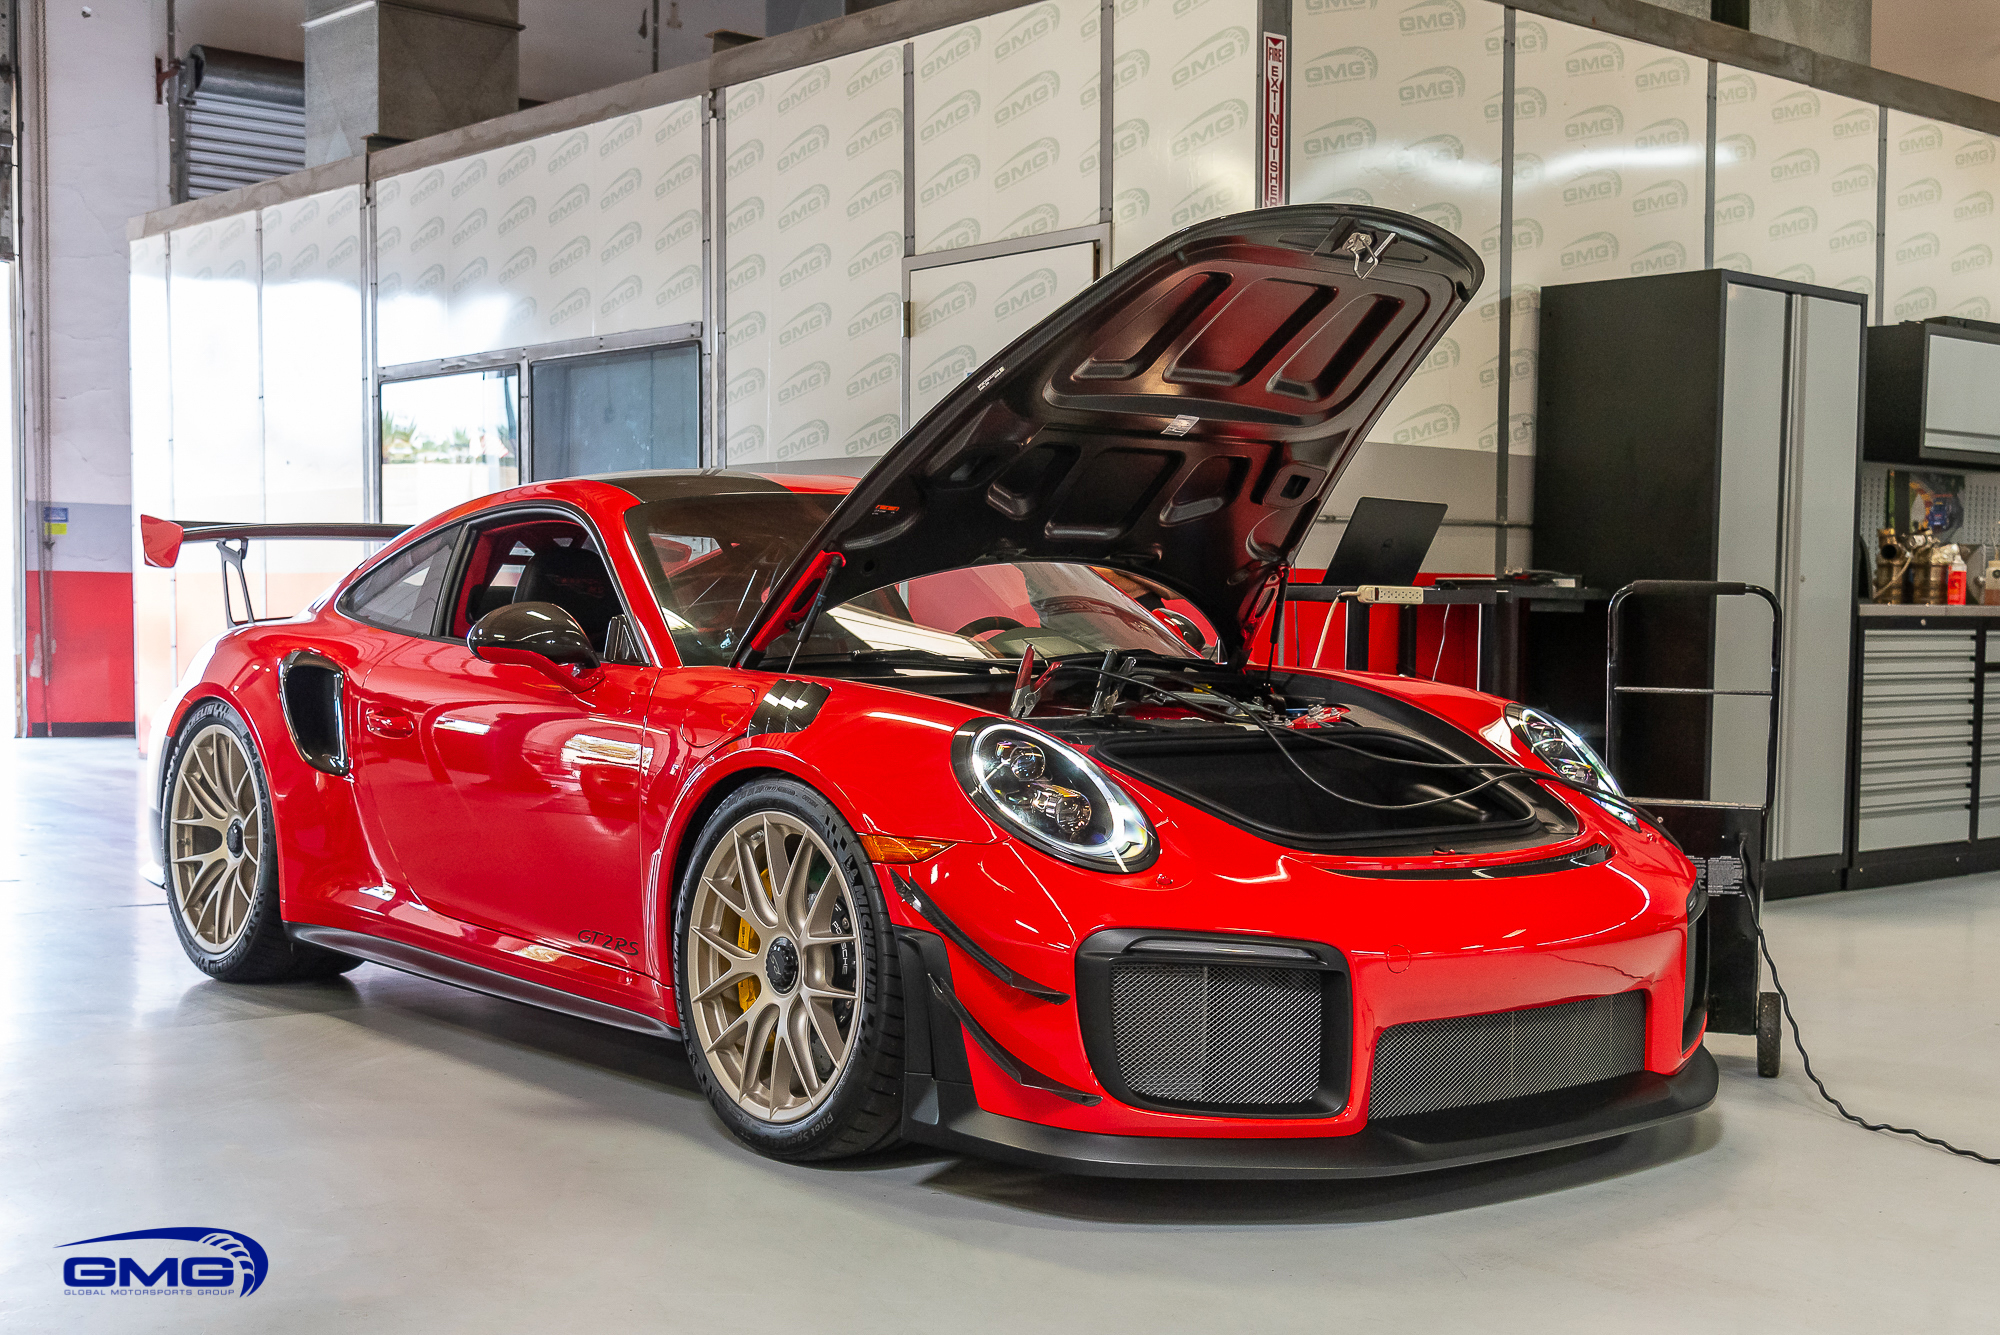 Guards Red 991 GT2 RS